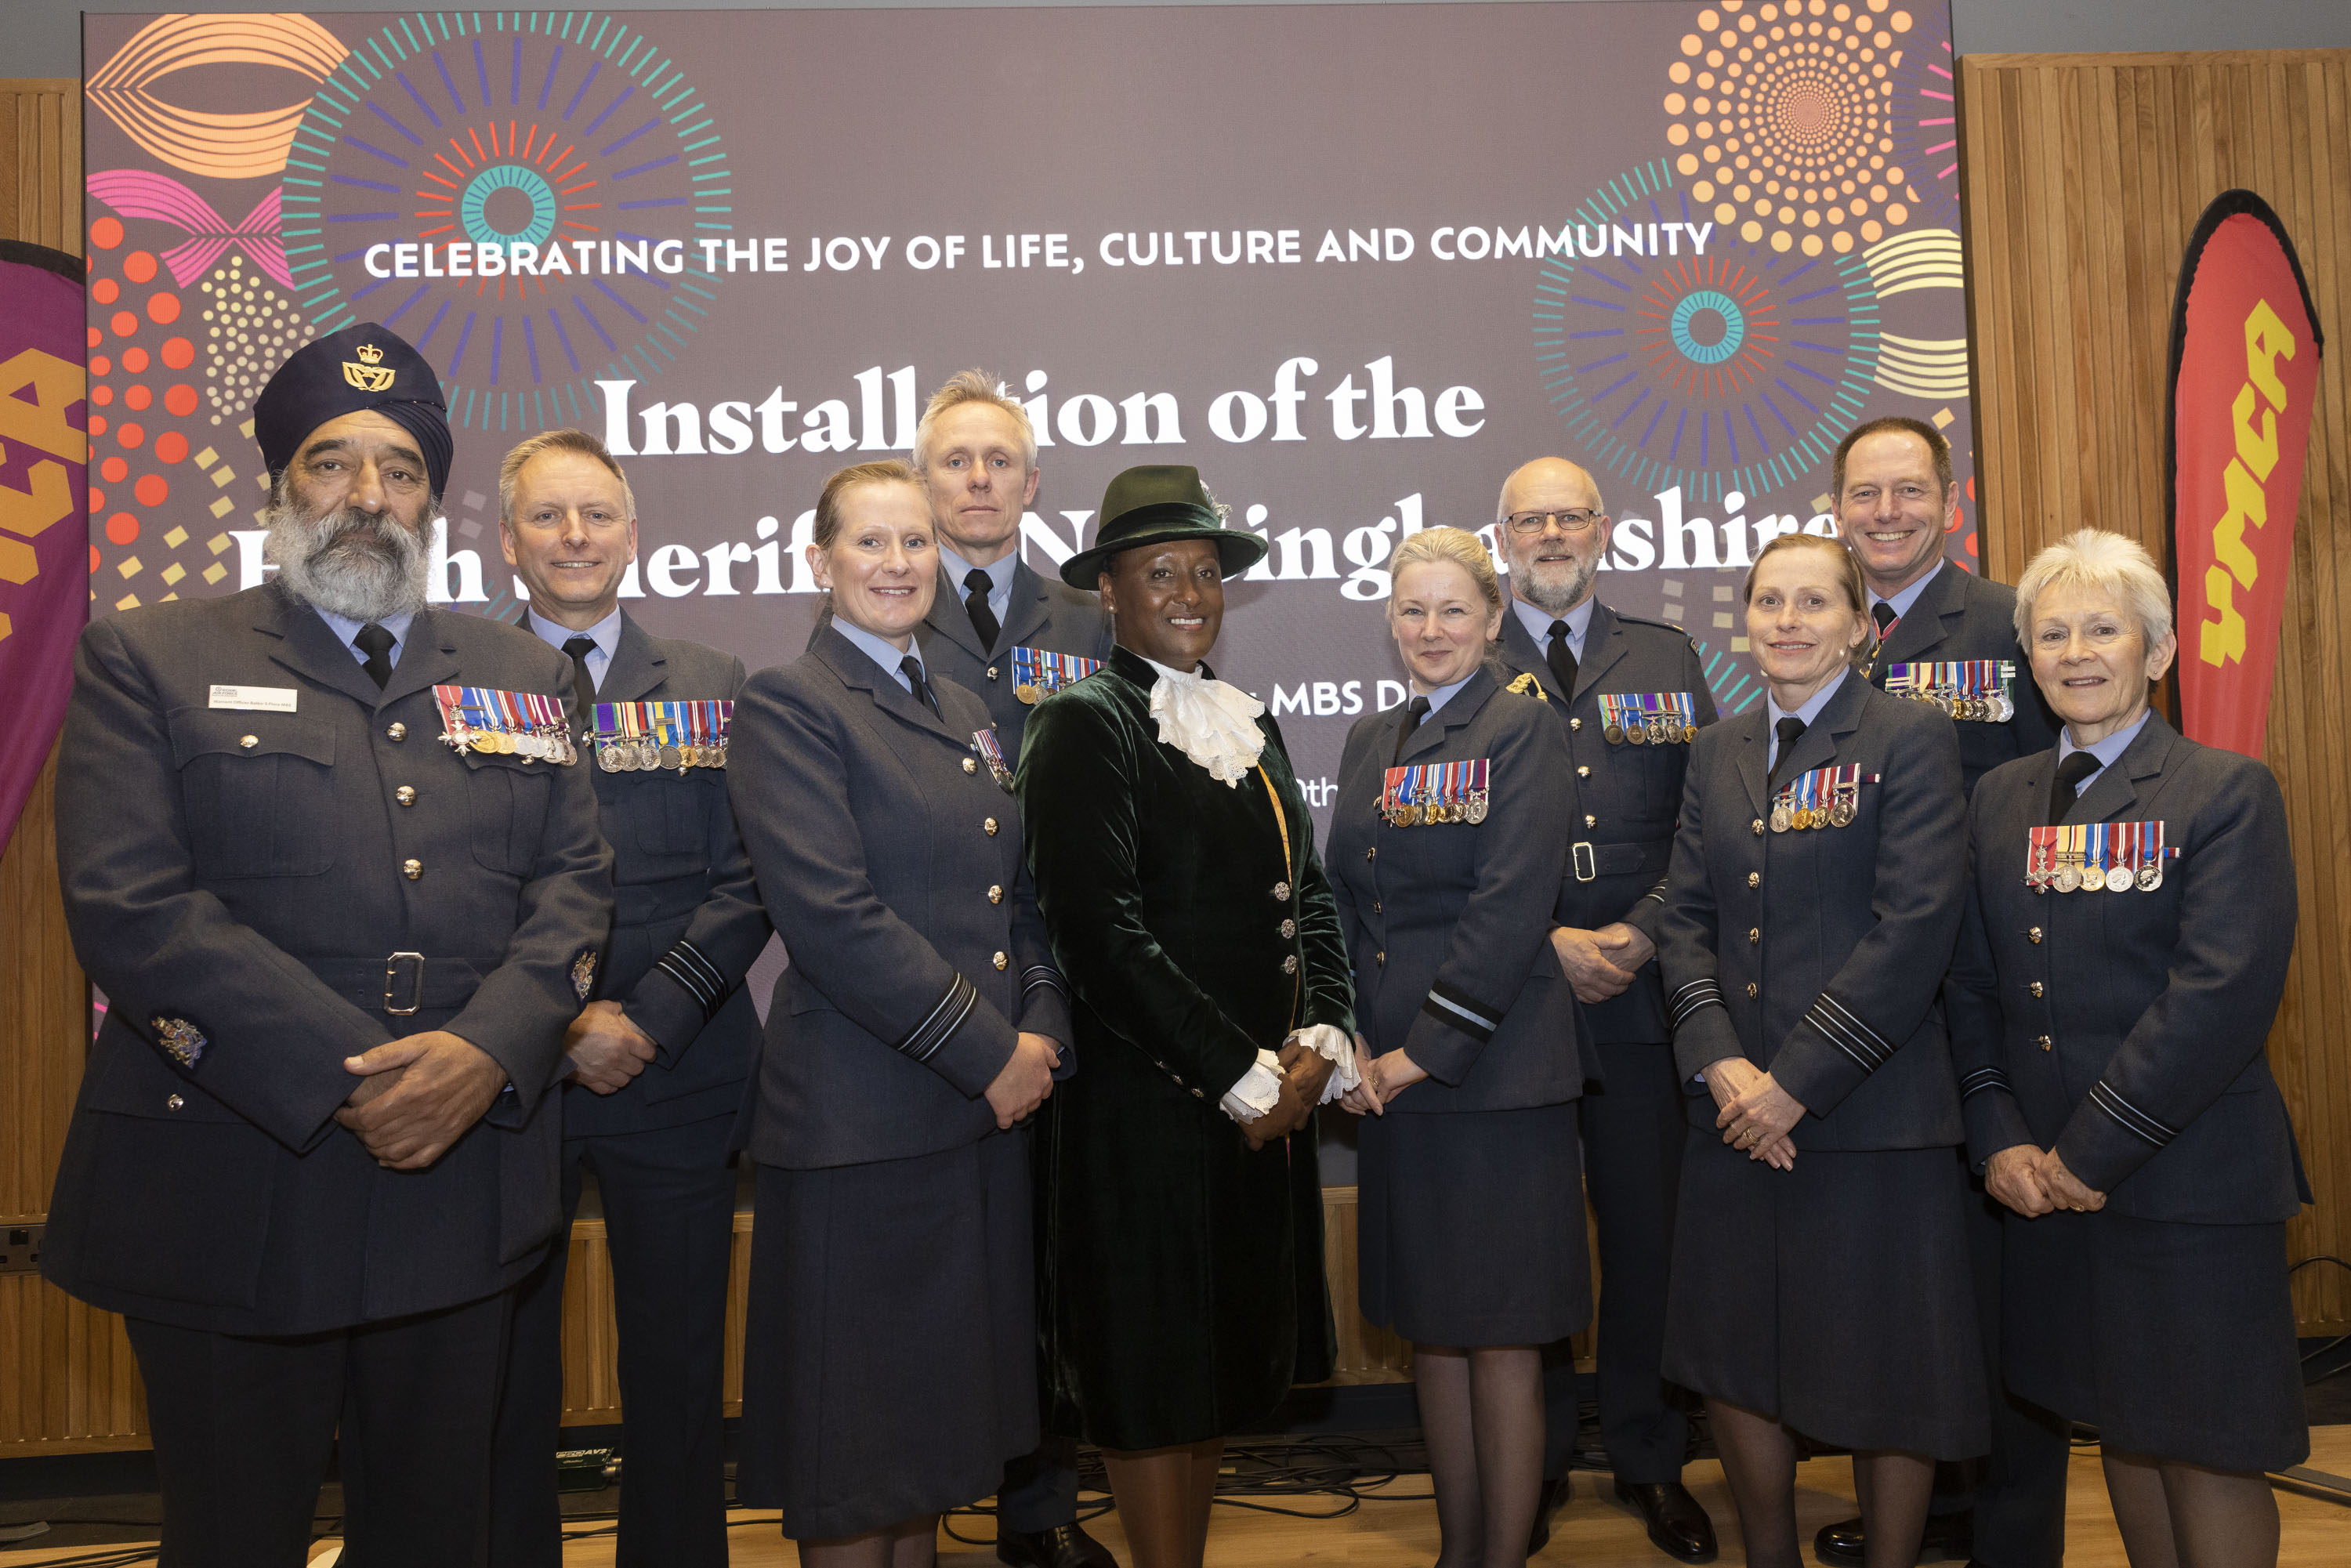 504 Sqn Honorary Air Commodore Veronica Moraa Pickering with representatives from the Royal Air Force